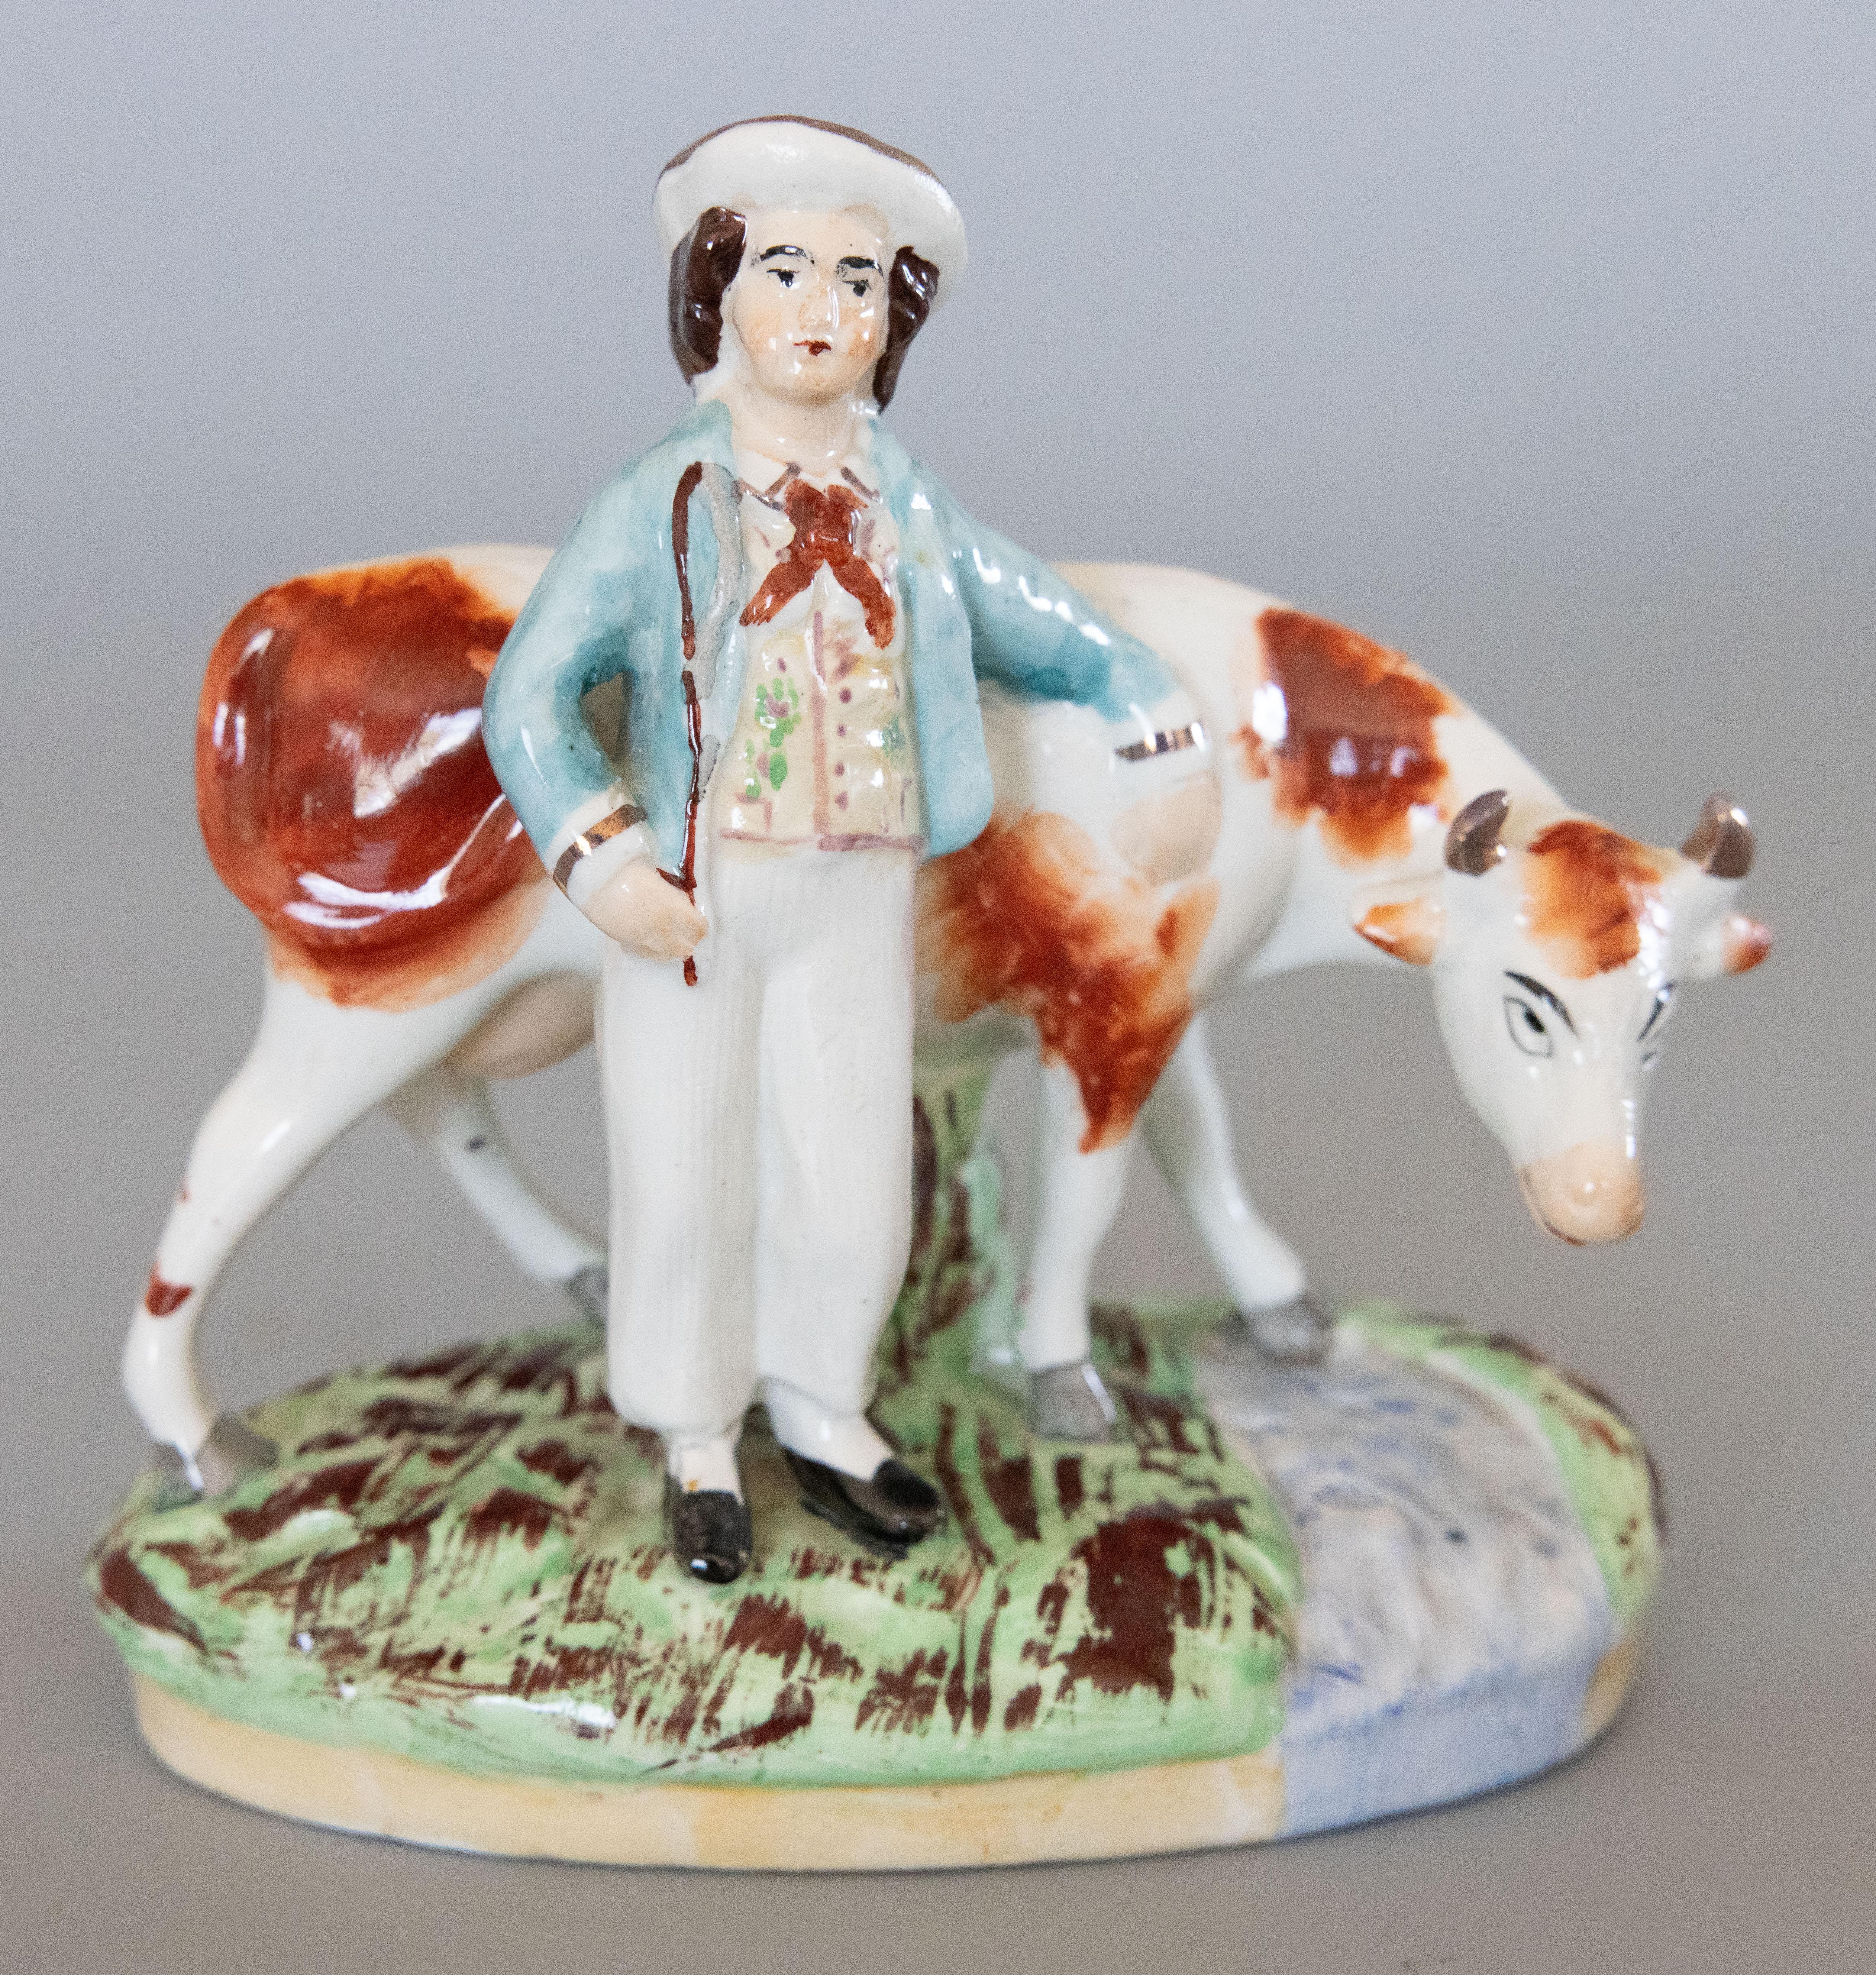 A superb pair of antique early 20th Century English Staffordshire boy and girl cow figurines. Maker's mark on reverse. These charming figurines feature a finely hand painted lad and milk maid with their arms resting on red and white cows standing on